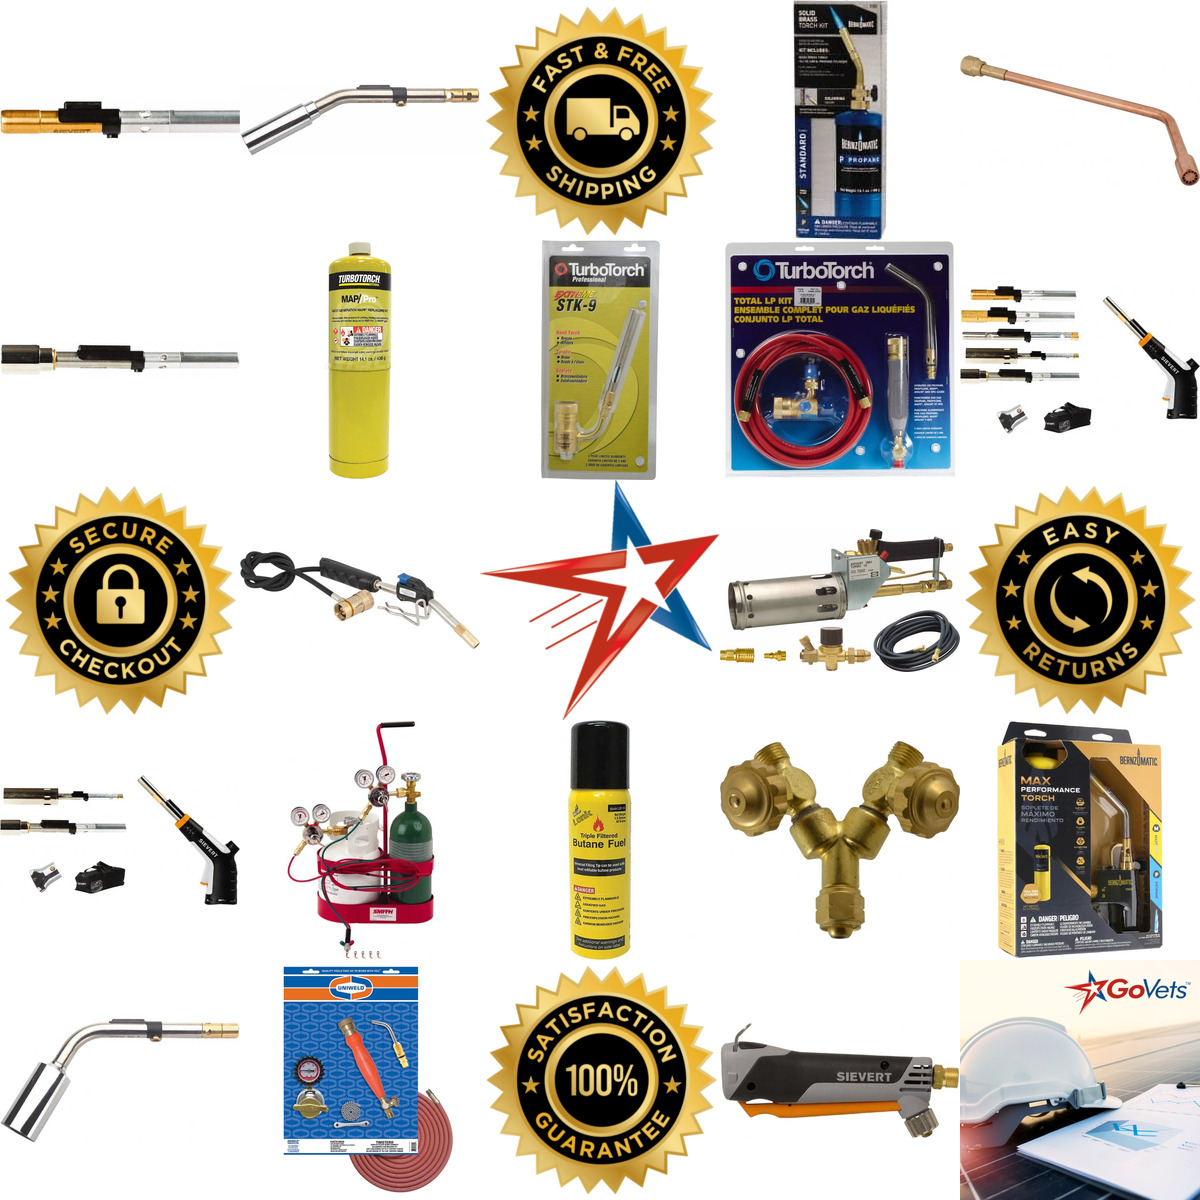 A selection of Propane and Mapp Torches products on GoVets